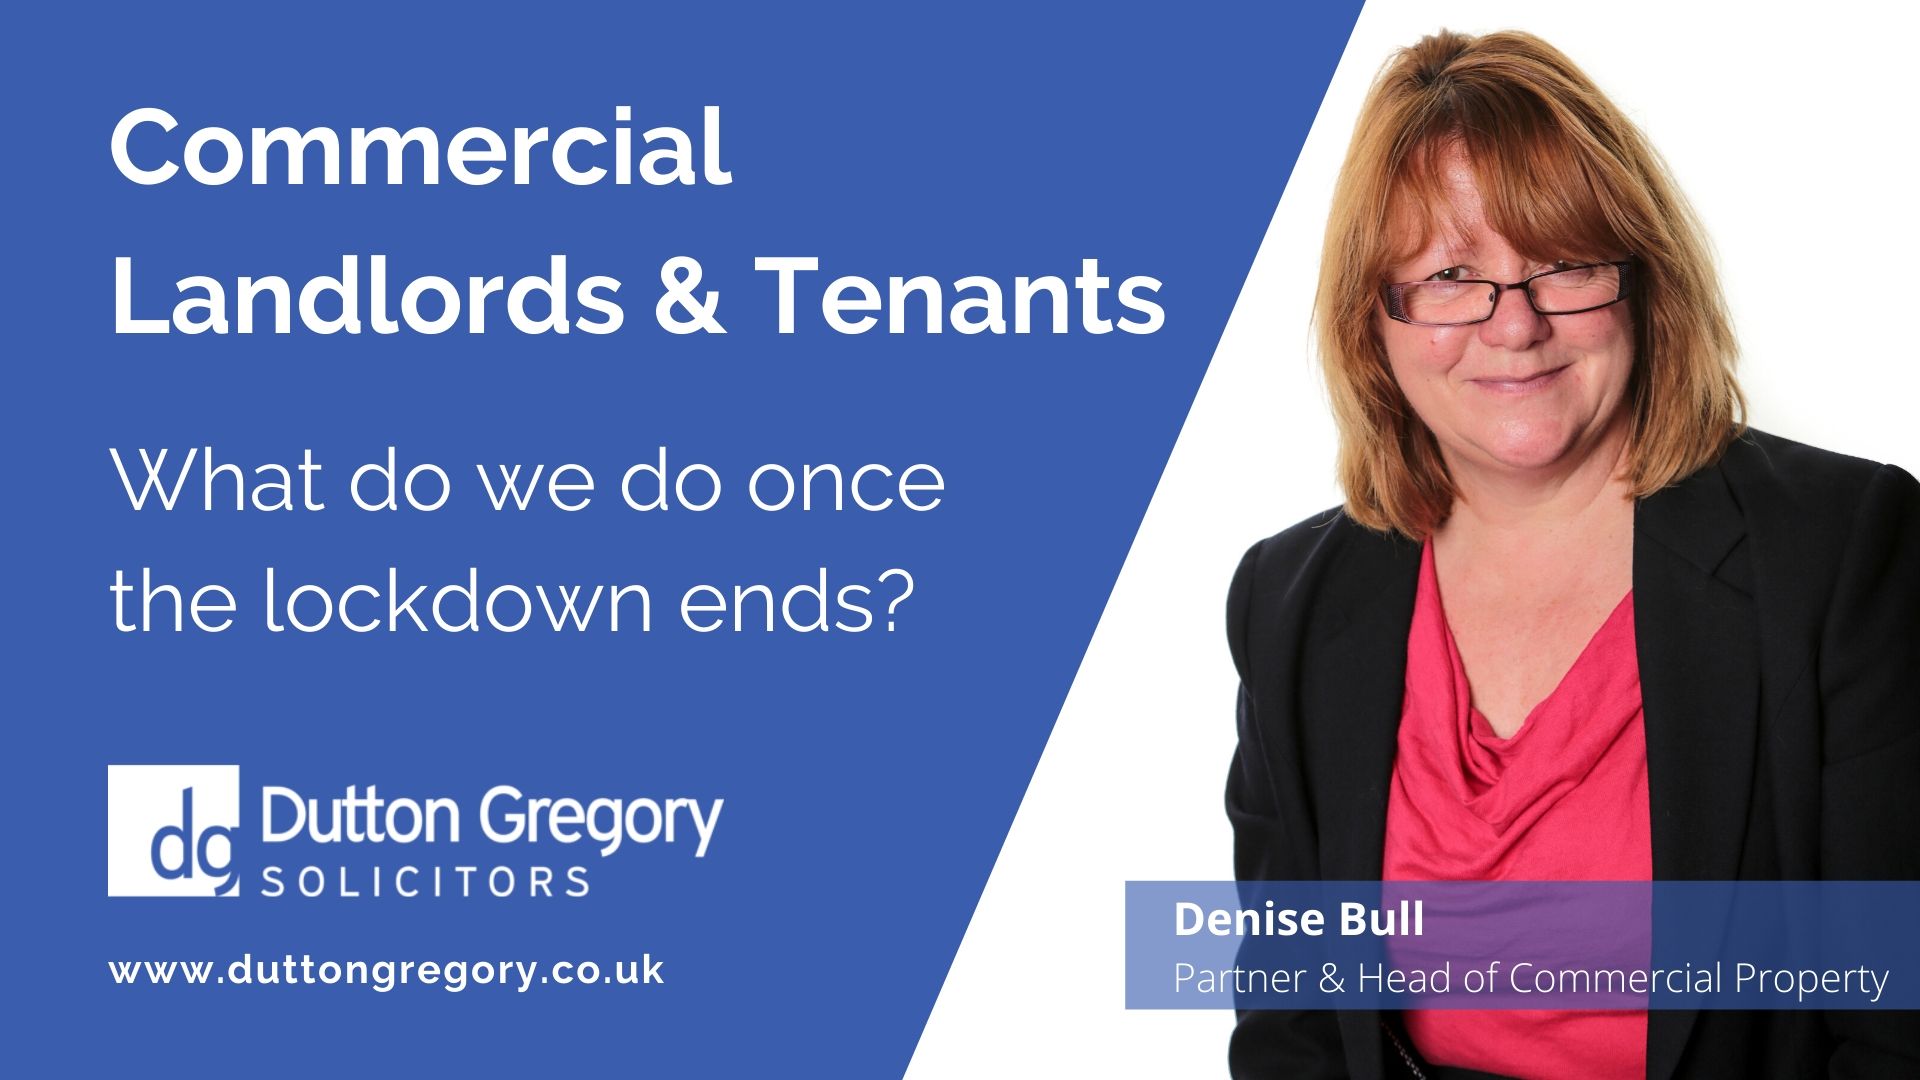 Commercial landlords and tenants: what do we do once the lockdown ends?